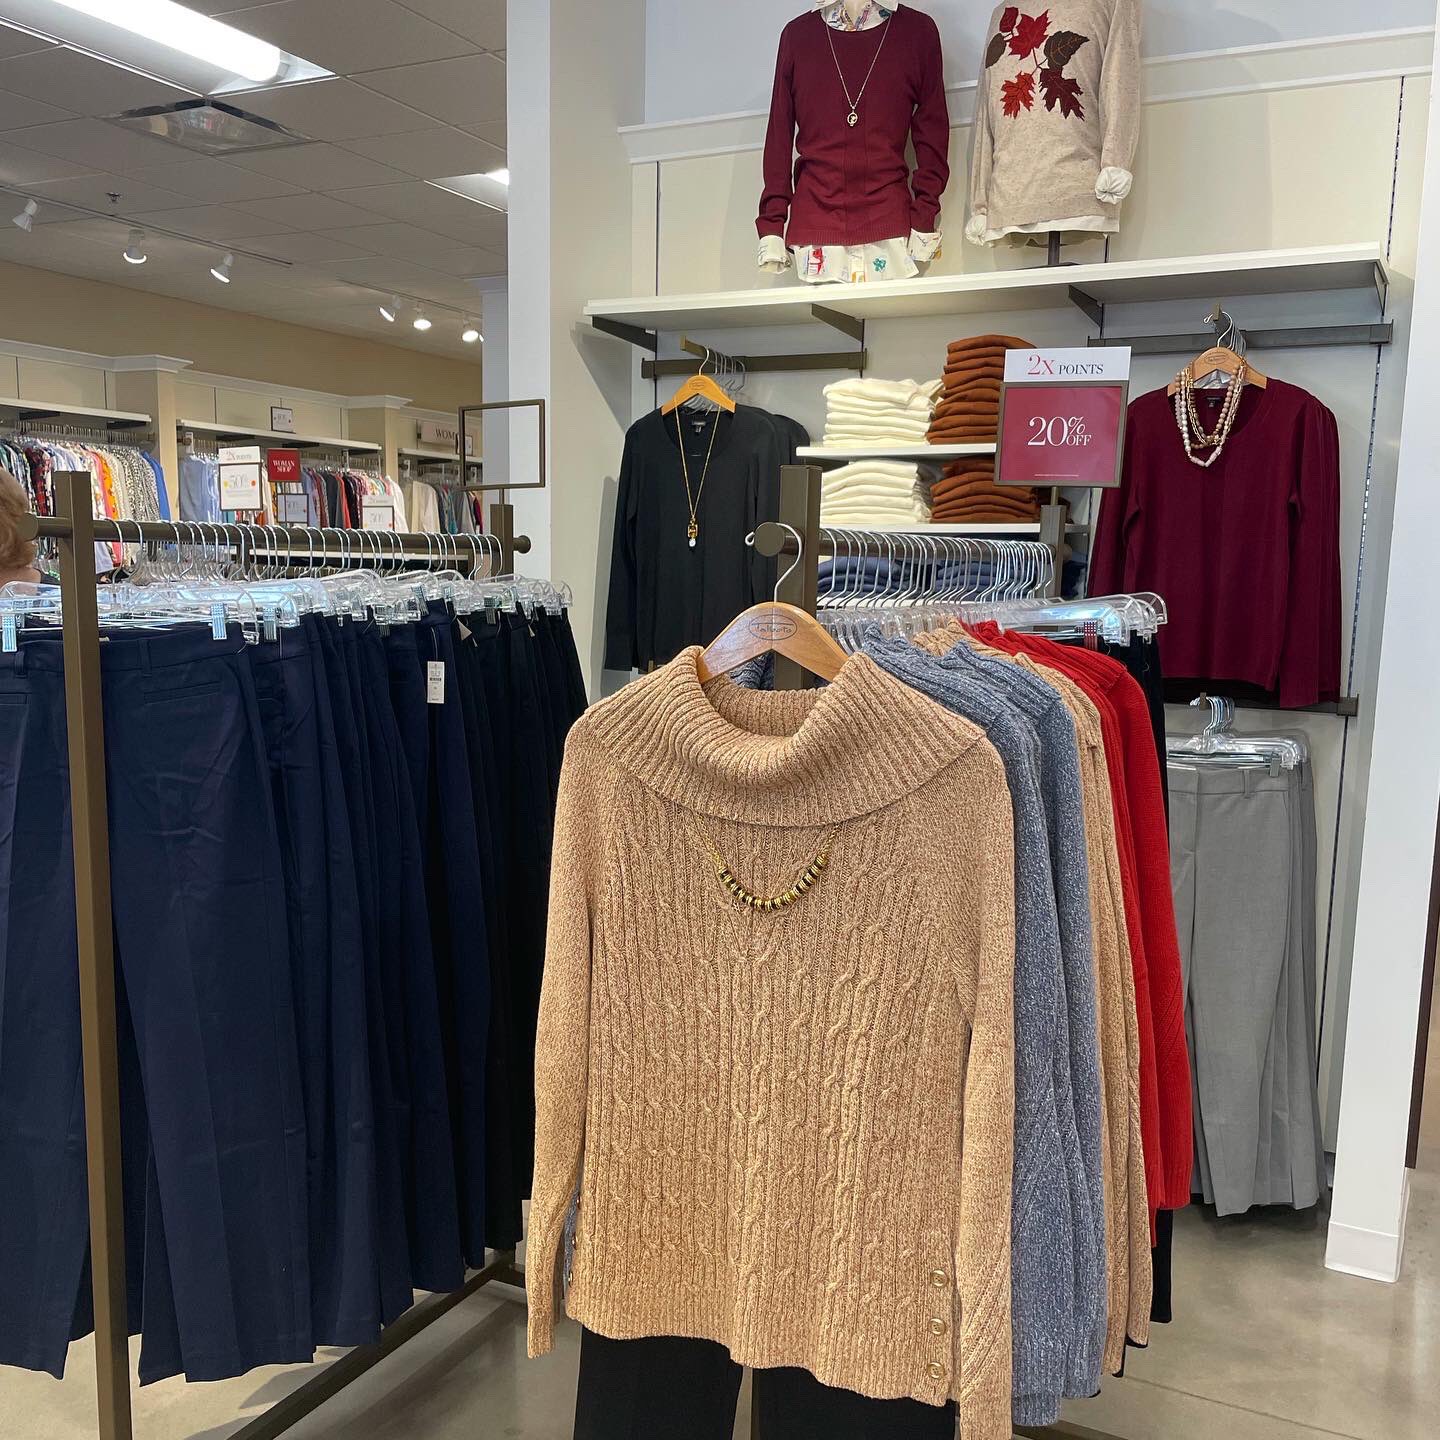 OutletAtGettysburg on X: SWEATER WEATHER 🍁 SHOP THE COZY NEW ARRIVALS AT TALBOTS  OUTLET GETTYSBURG! #gettysburgoutlets #gettysburg #talbots #talbotsoutlet  #fashion #accessories #womensfashion #outlet #outletshopping #shopping  #sale #shoppingspree